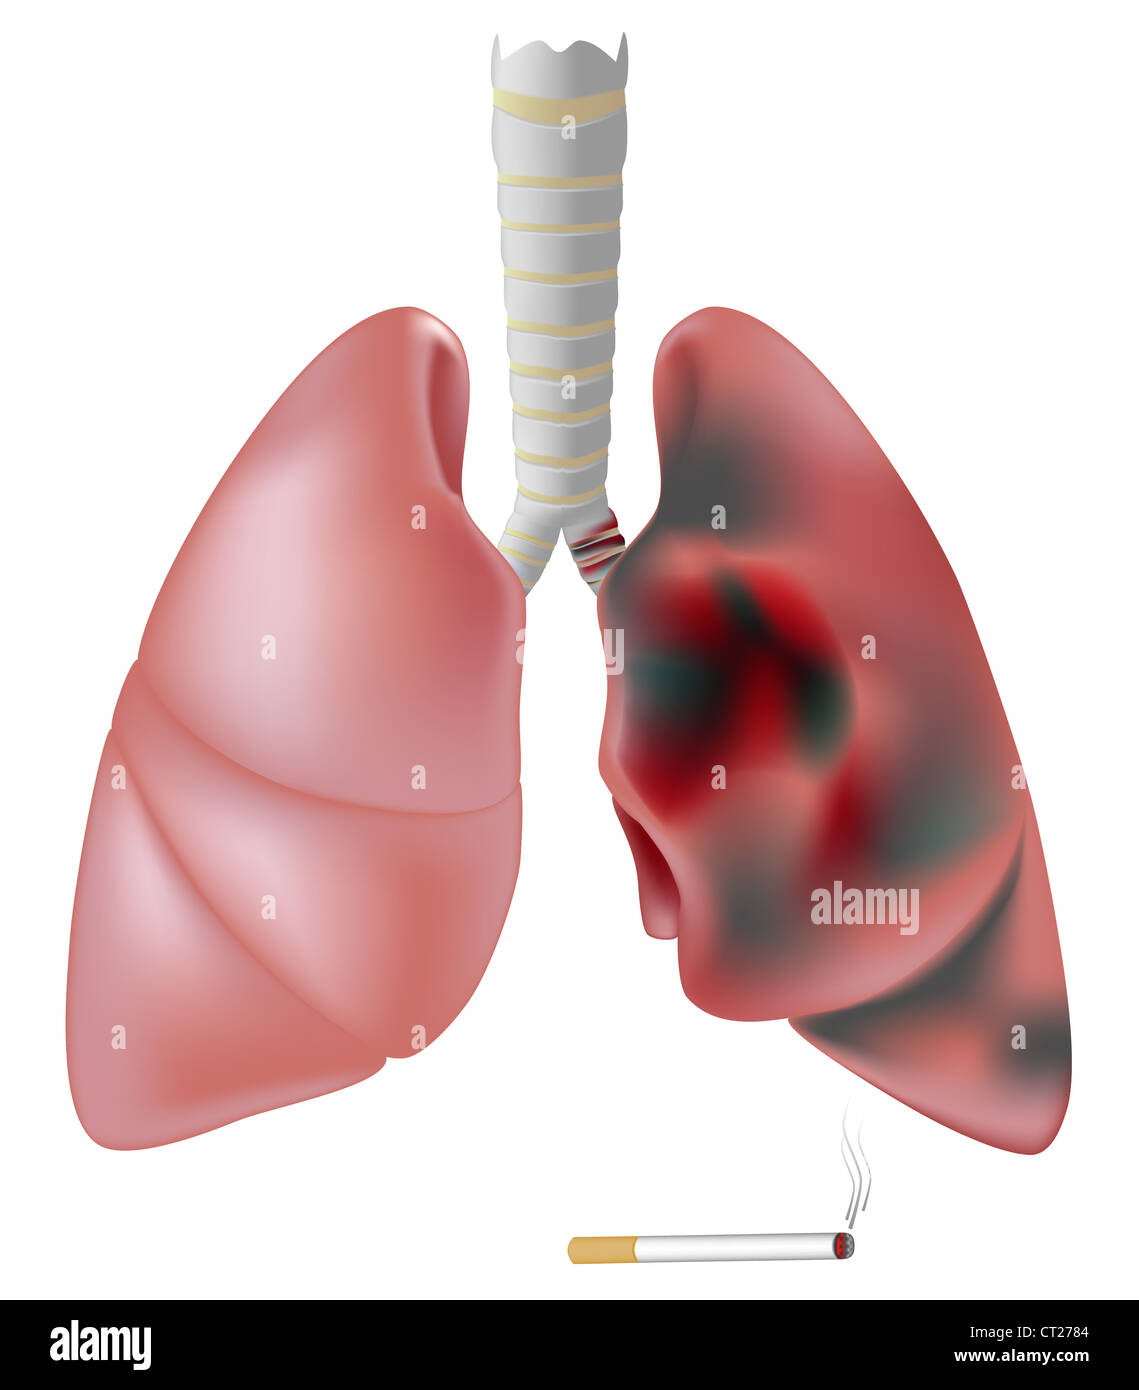 Smoker's lung (with tumor) vs healthy lung Stock Photo